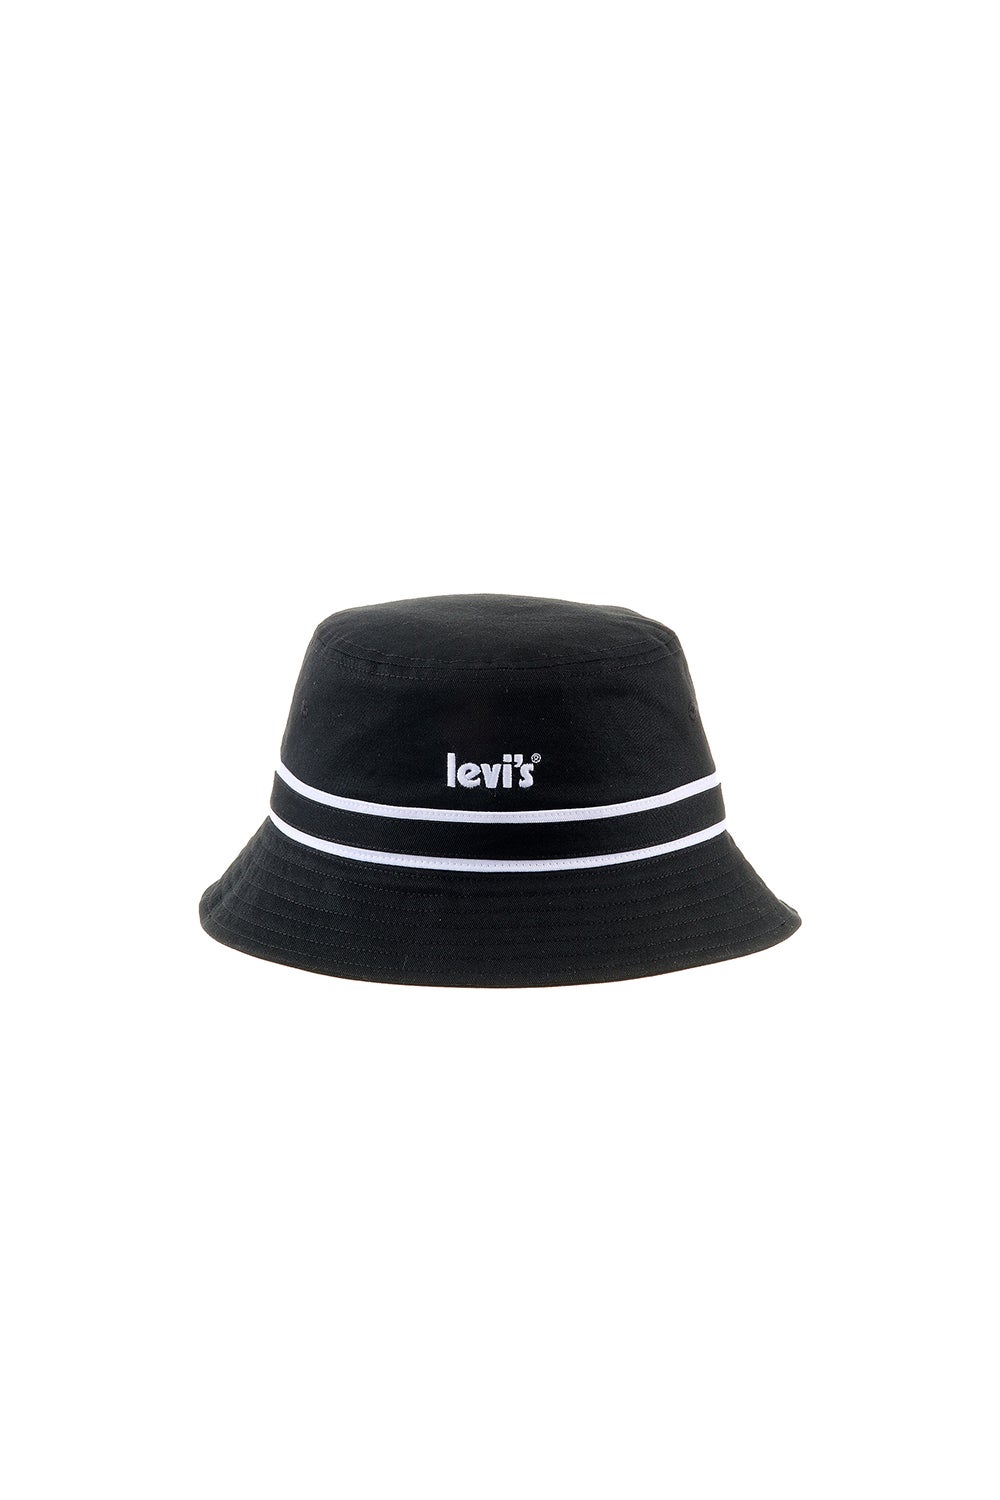 Levi's Bucket Hat with Poster Logo Black